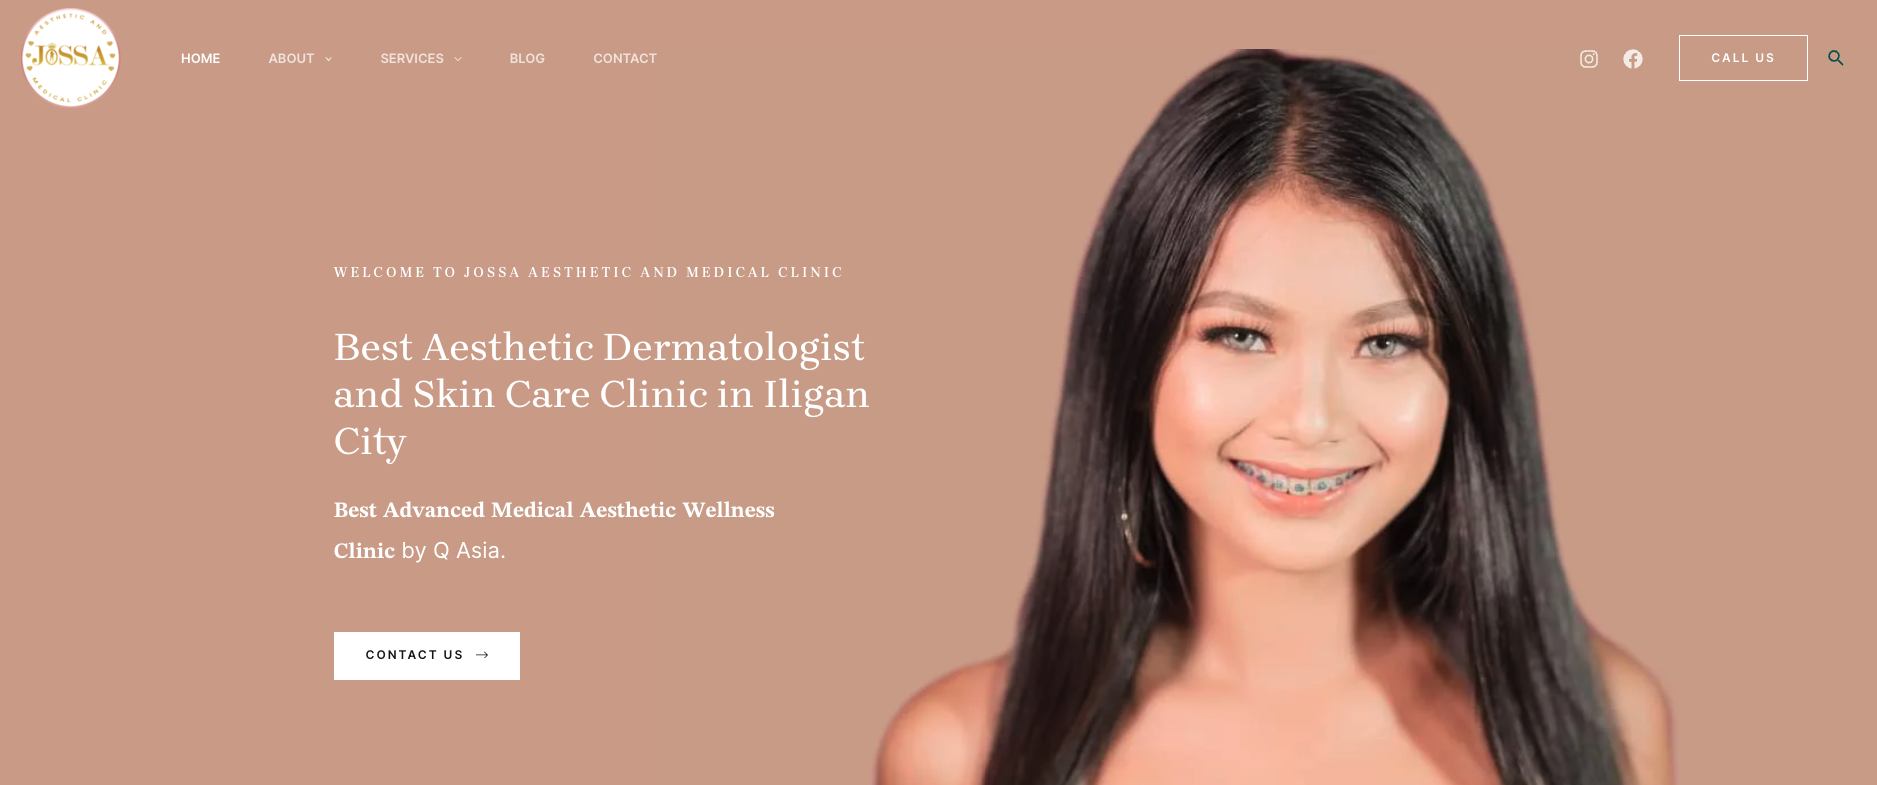 Best Aesthetic Dermatologist and Skin Care Clinic in Iligan City | Jossa Aesthetic and Medical Clinic